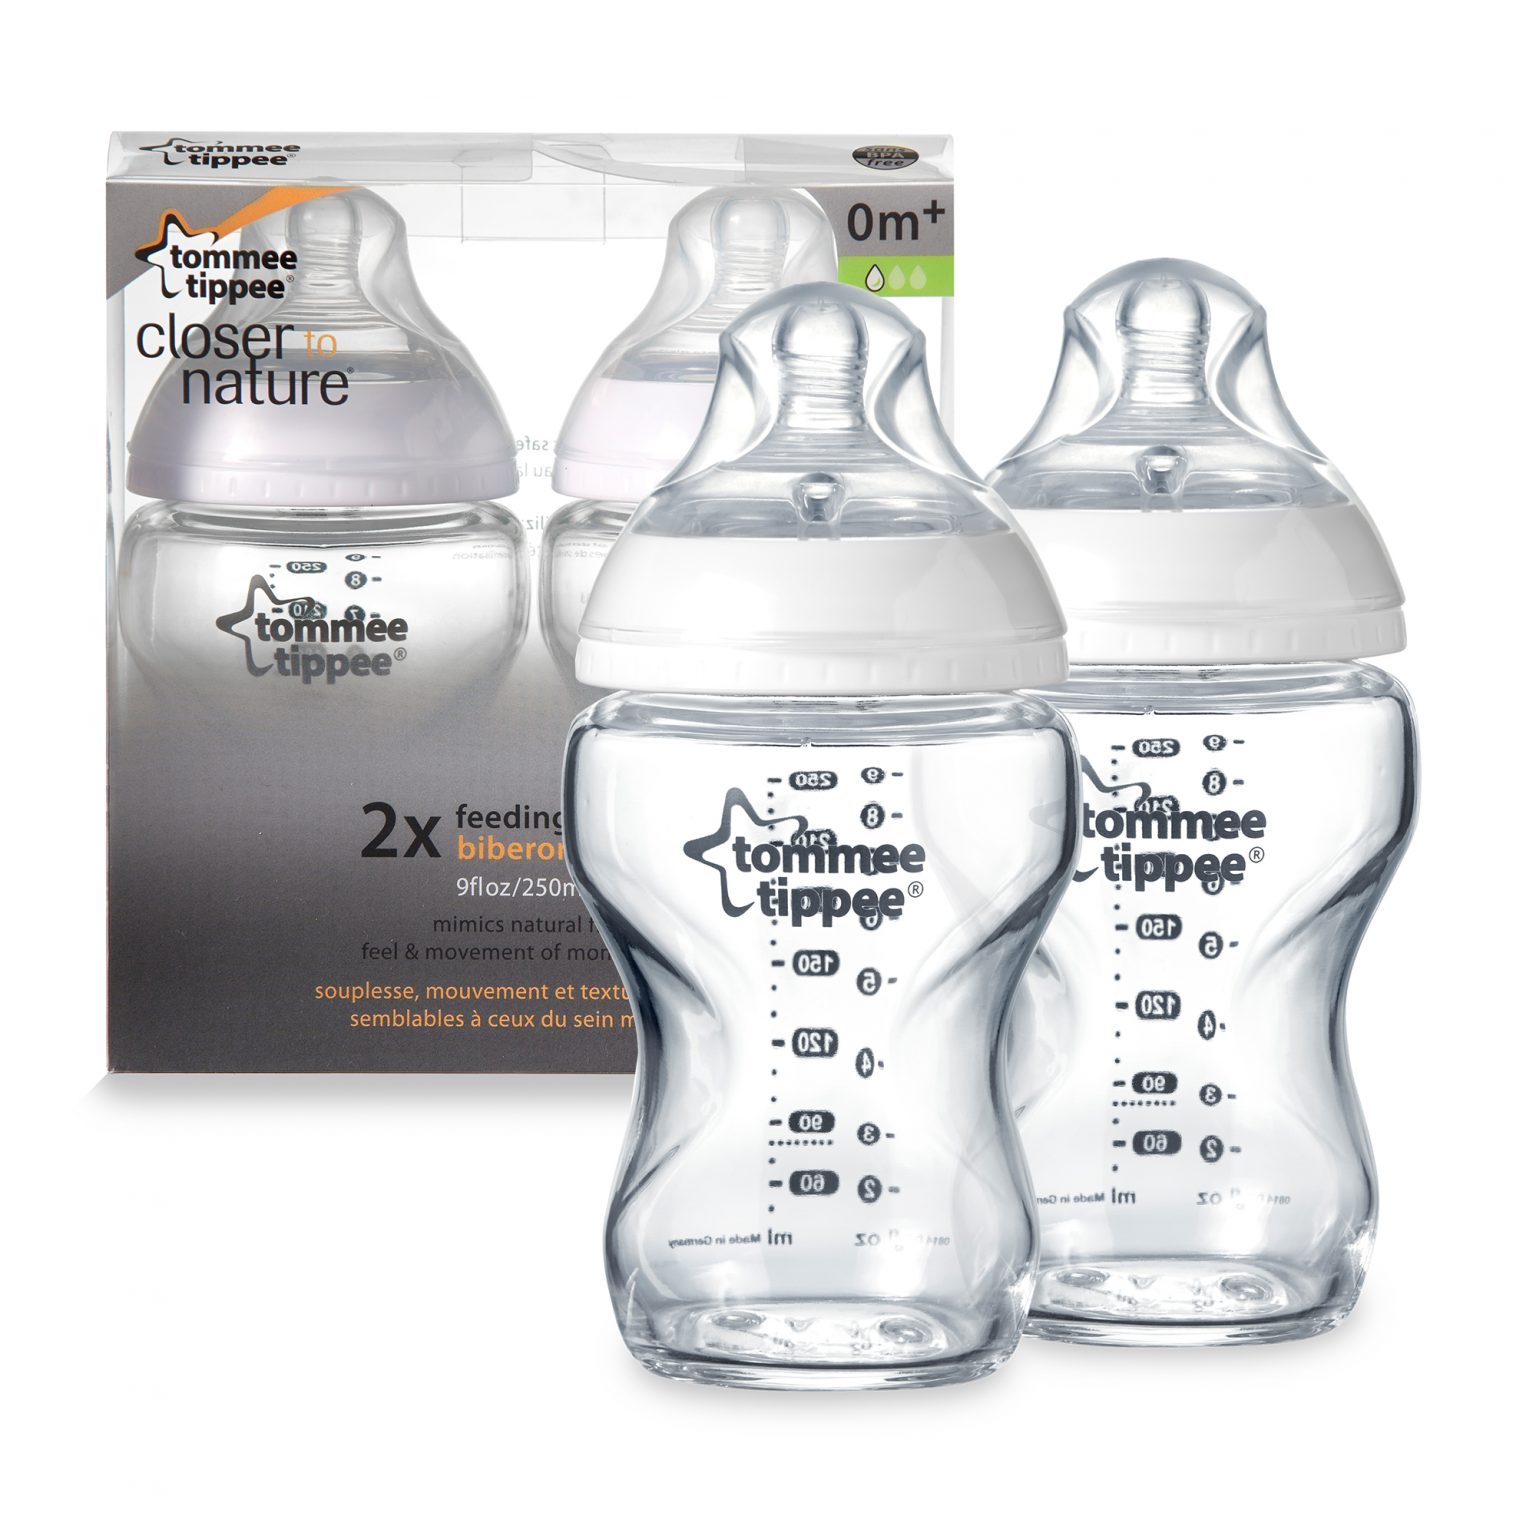 Tommee Tippee Closer to Nature Glass Bottles